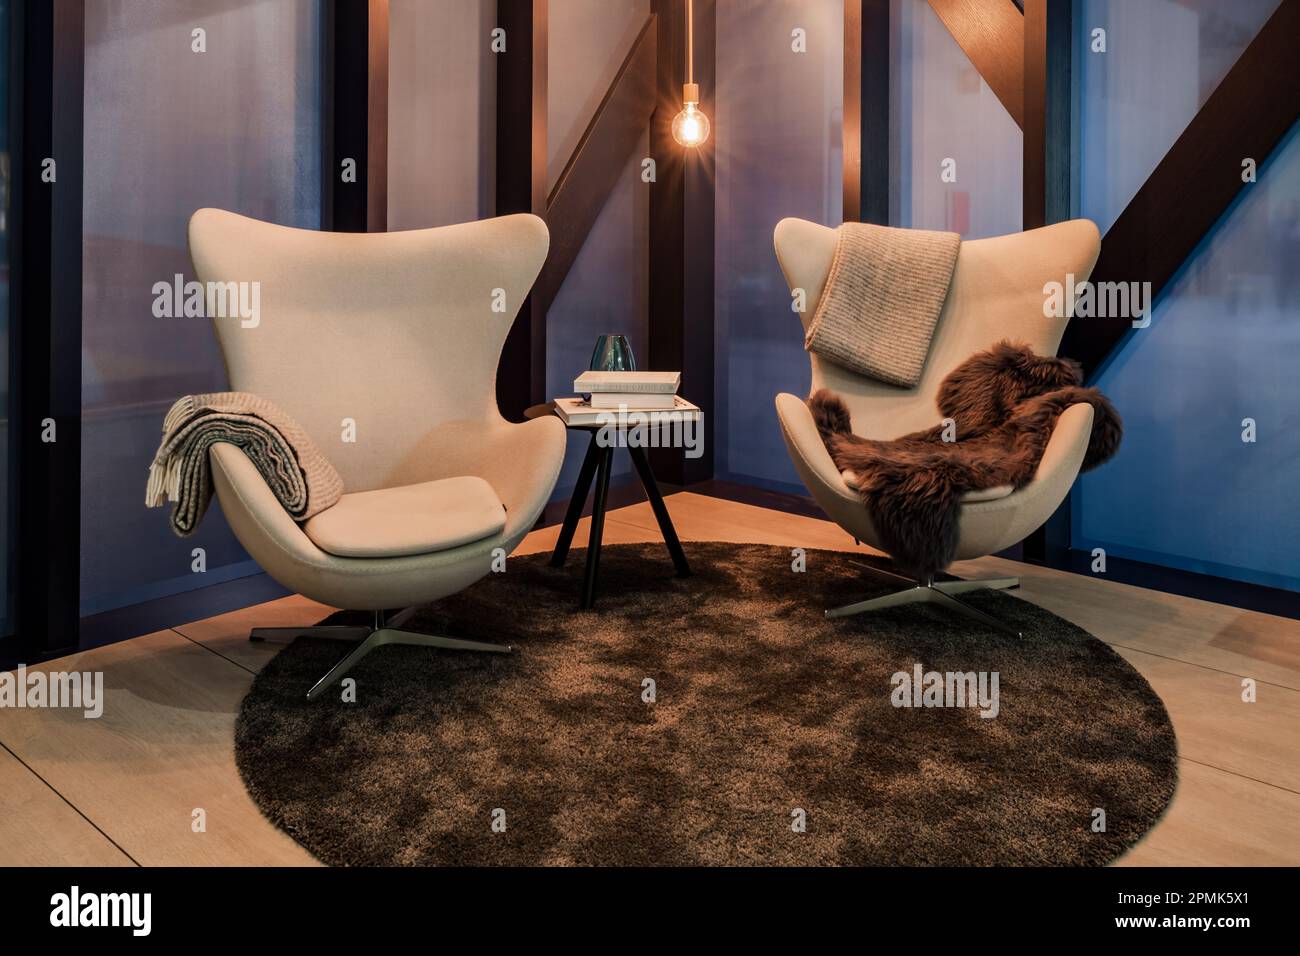 Contemporary interior design with two fabric armchairs Stock Photo